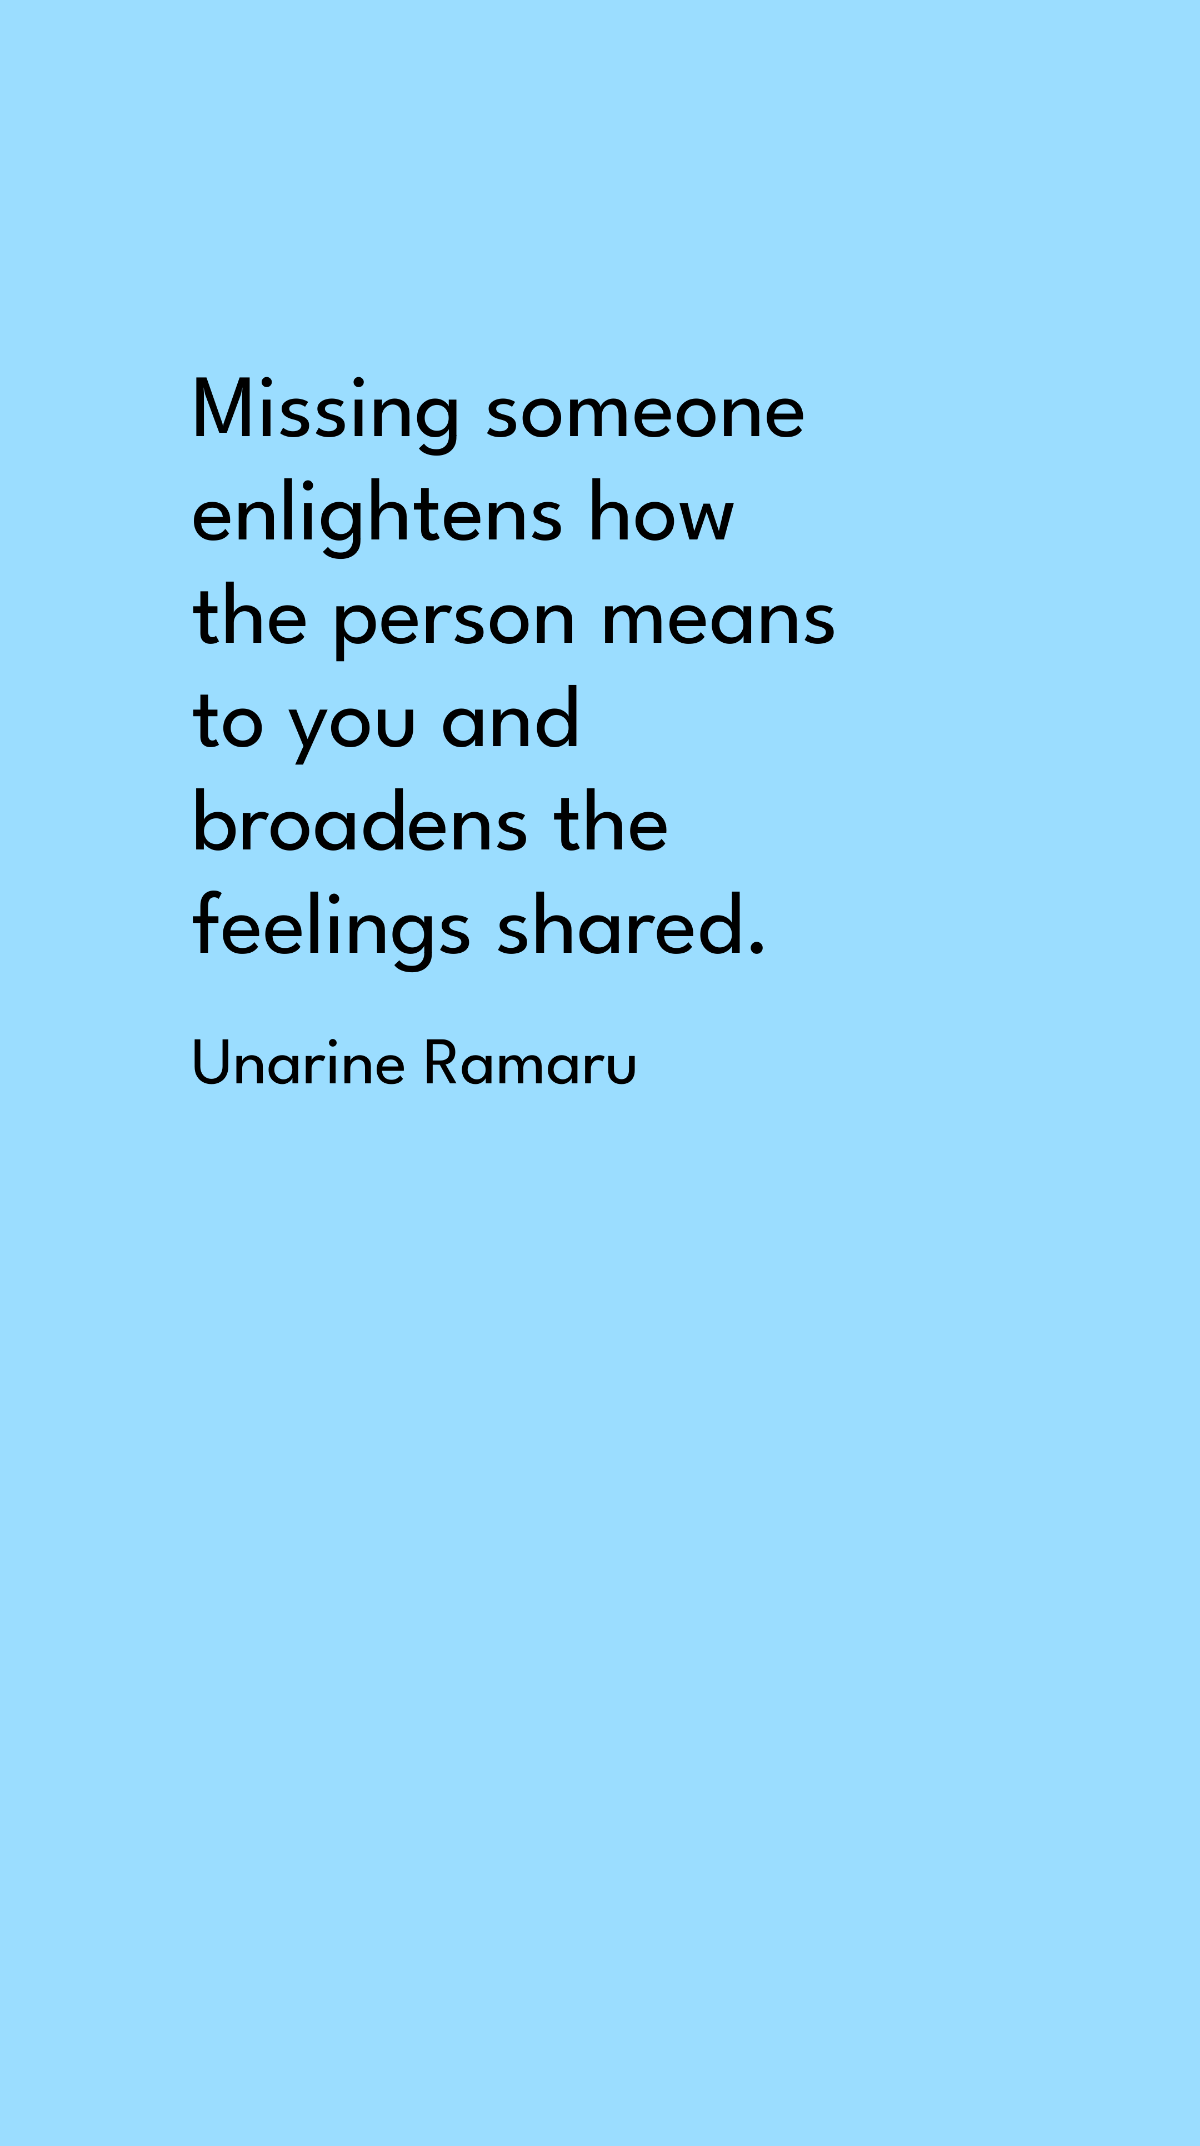 Unarine Ramaru - Missing someone enlightens how the person means to you and broadens the feelings shared.